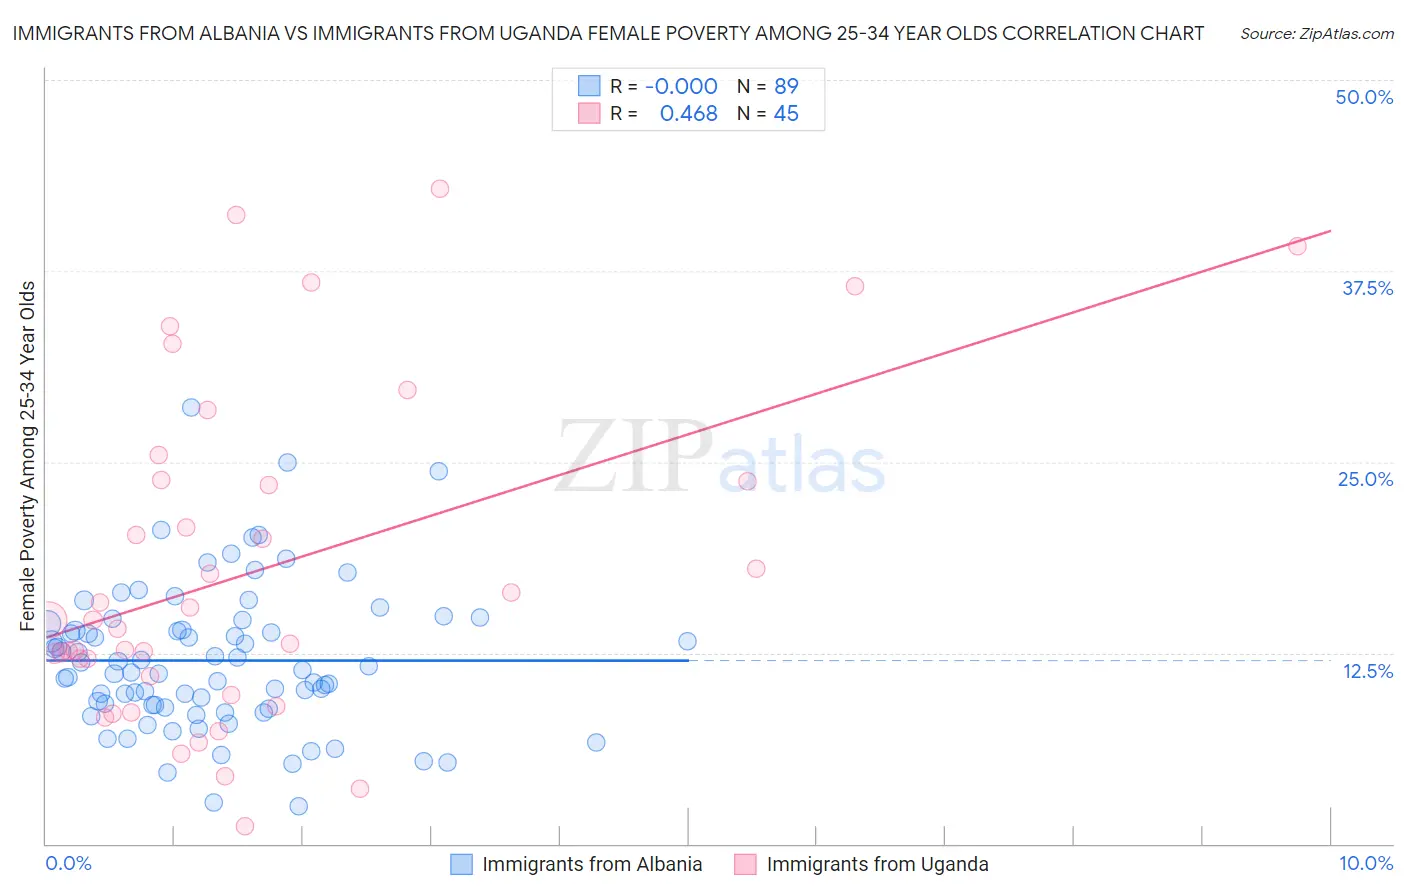 Immigrants from Albania vs Immigrants from Uganda Female Poverty Among 25-34 Year Olds